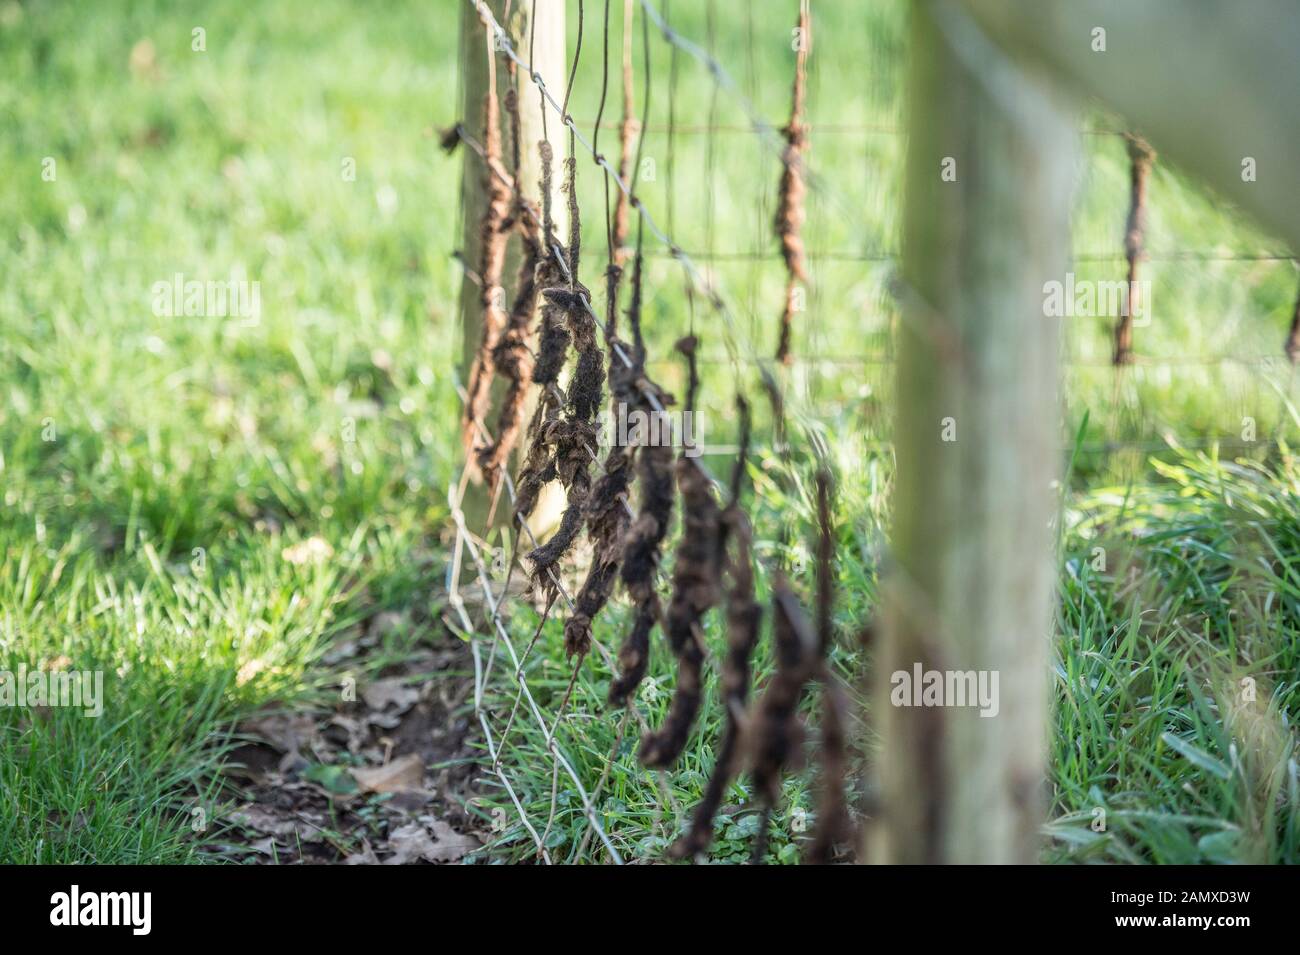 sheeps wool on wire fence Stock Photo